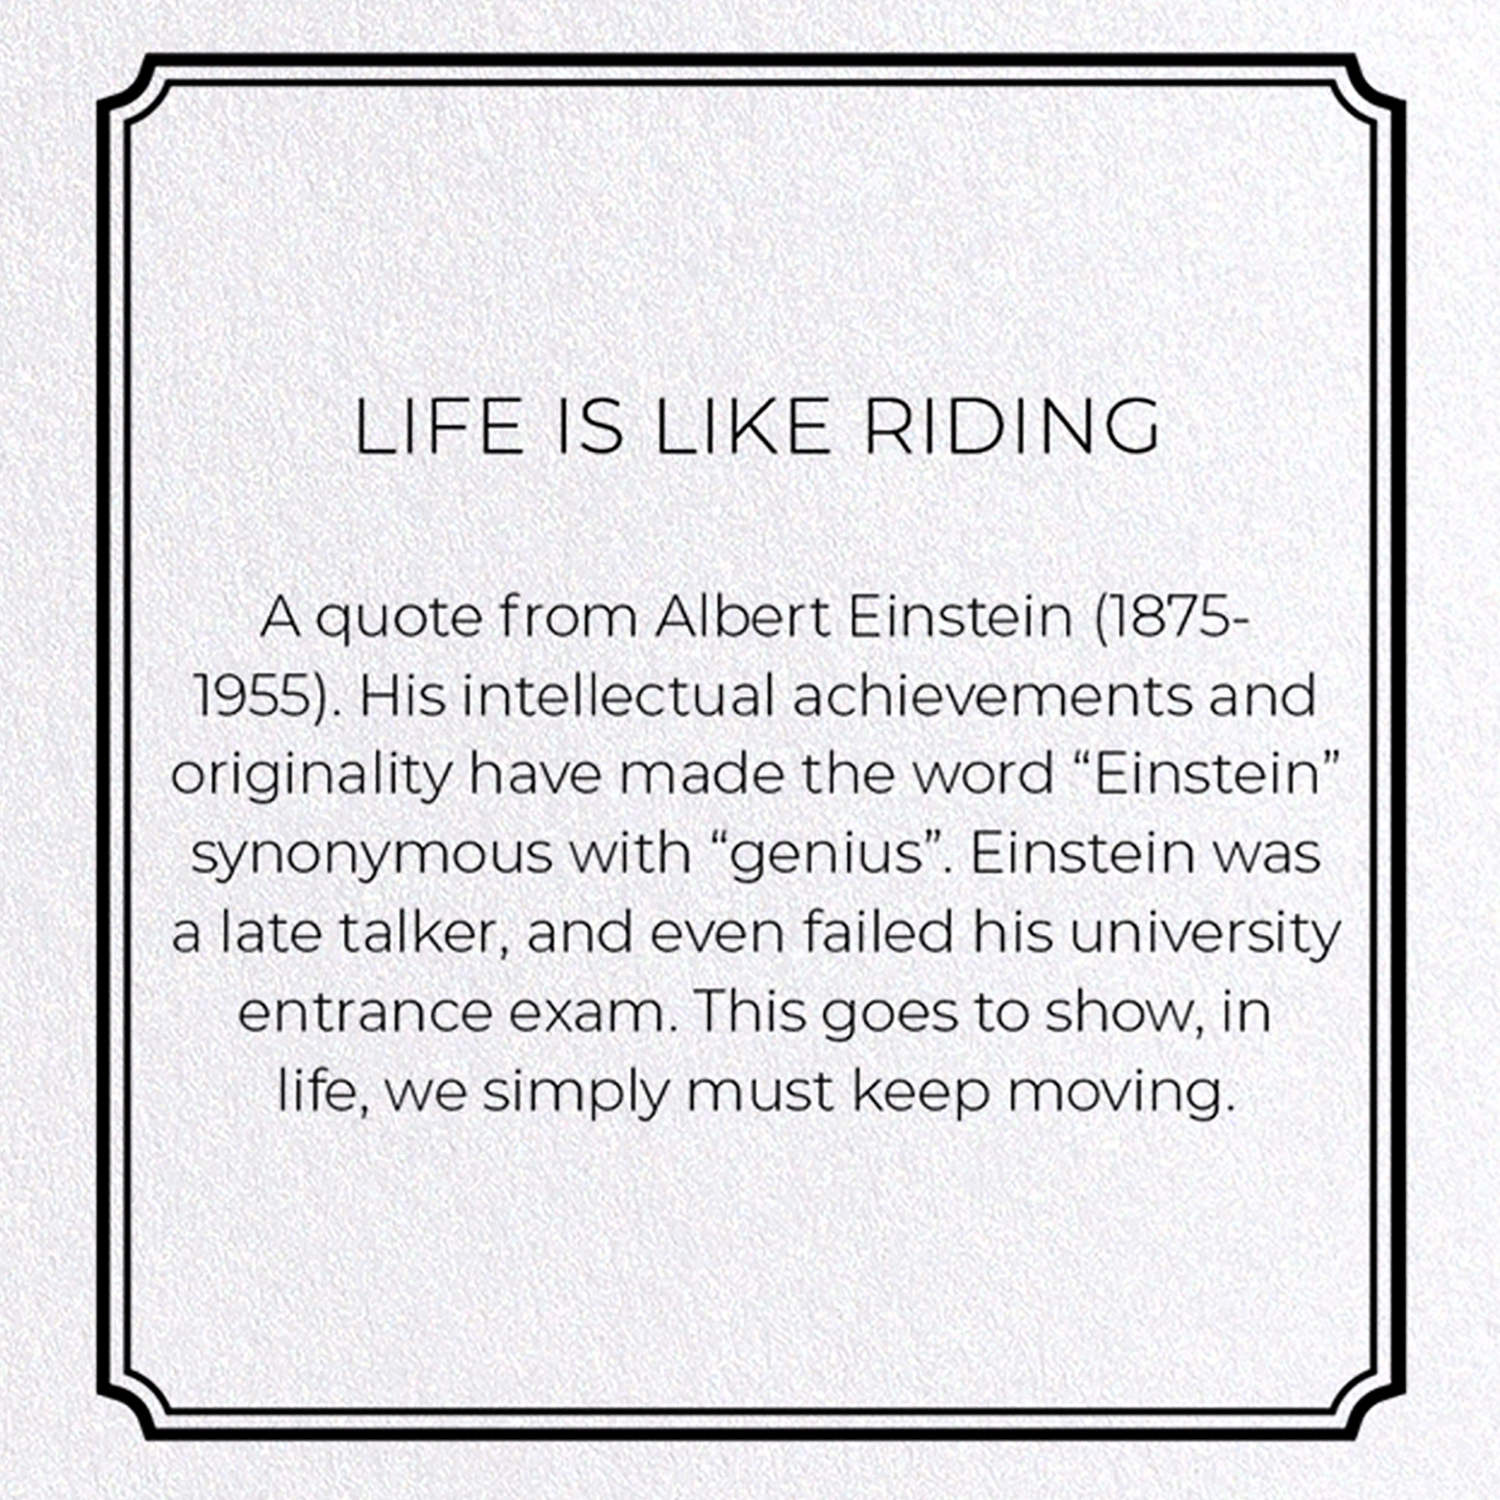 LIFE IS LIKE RIDING: Vintage Greeting Card